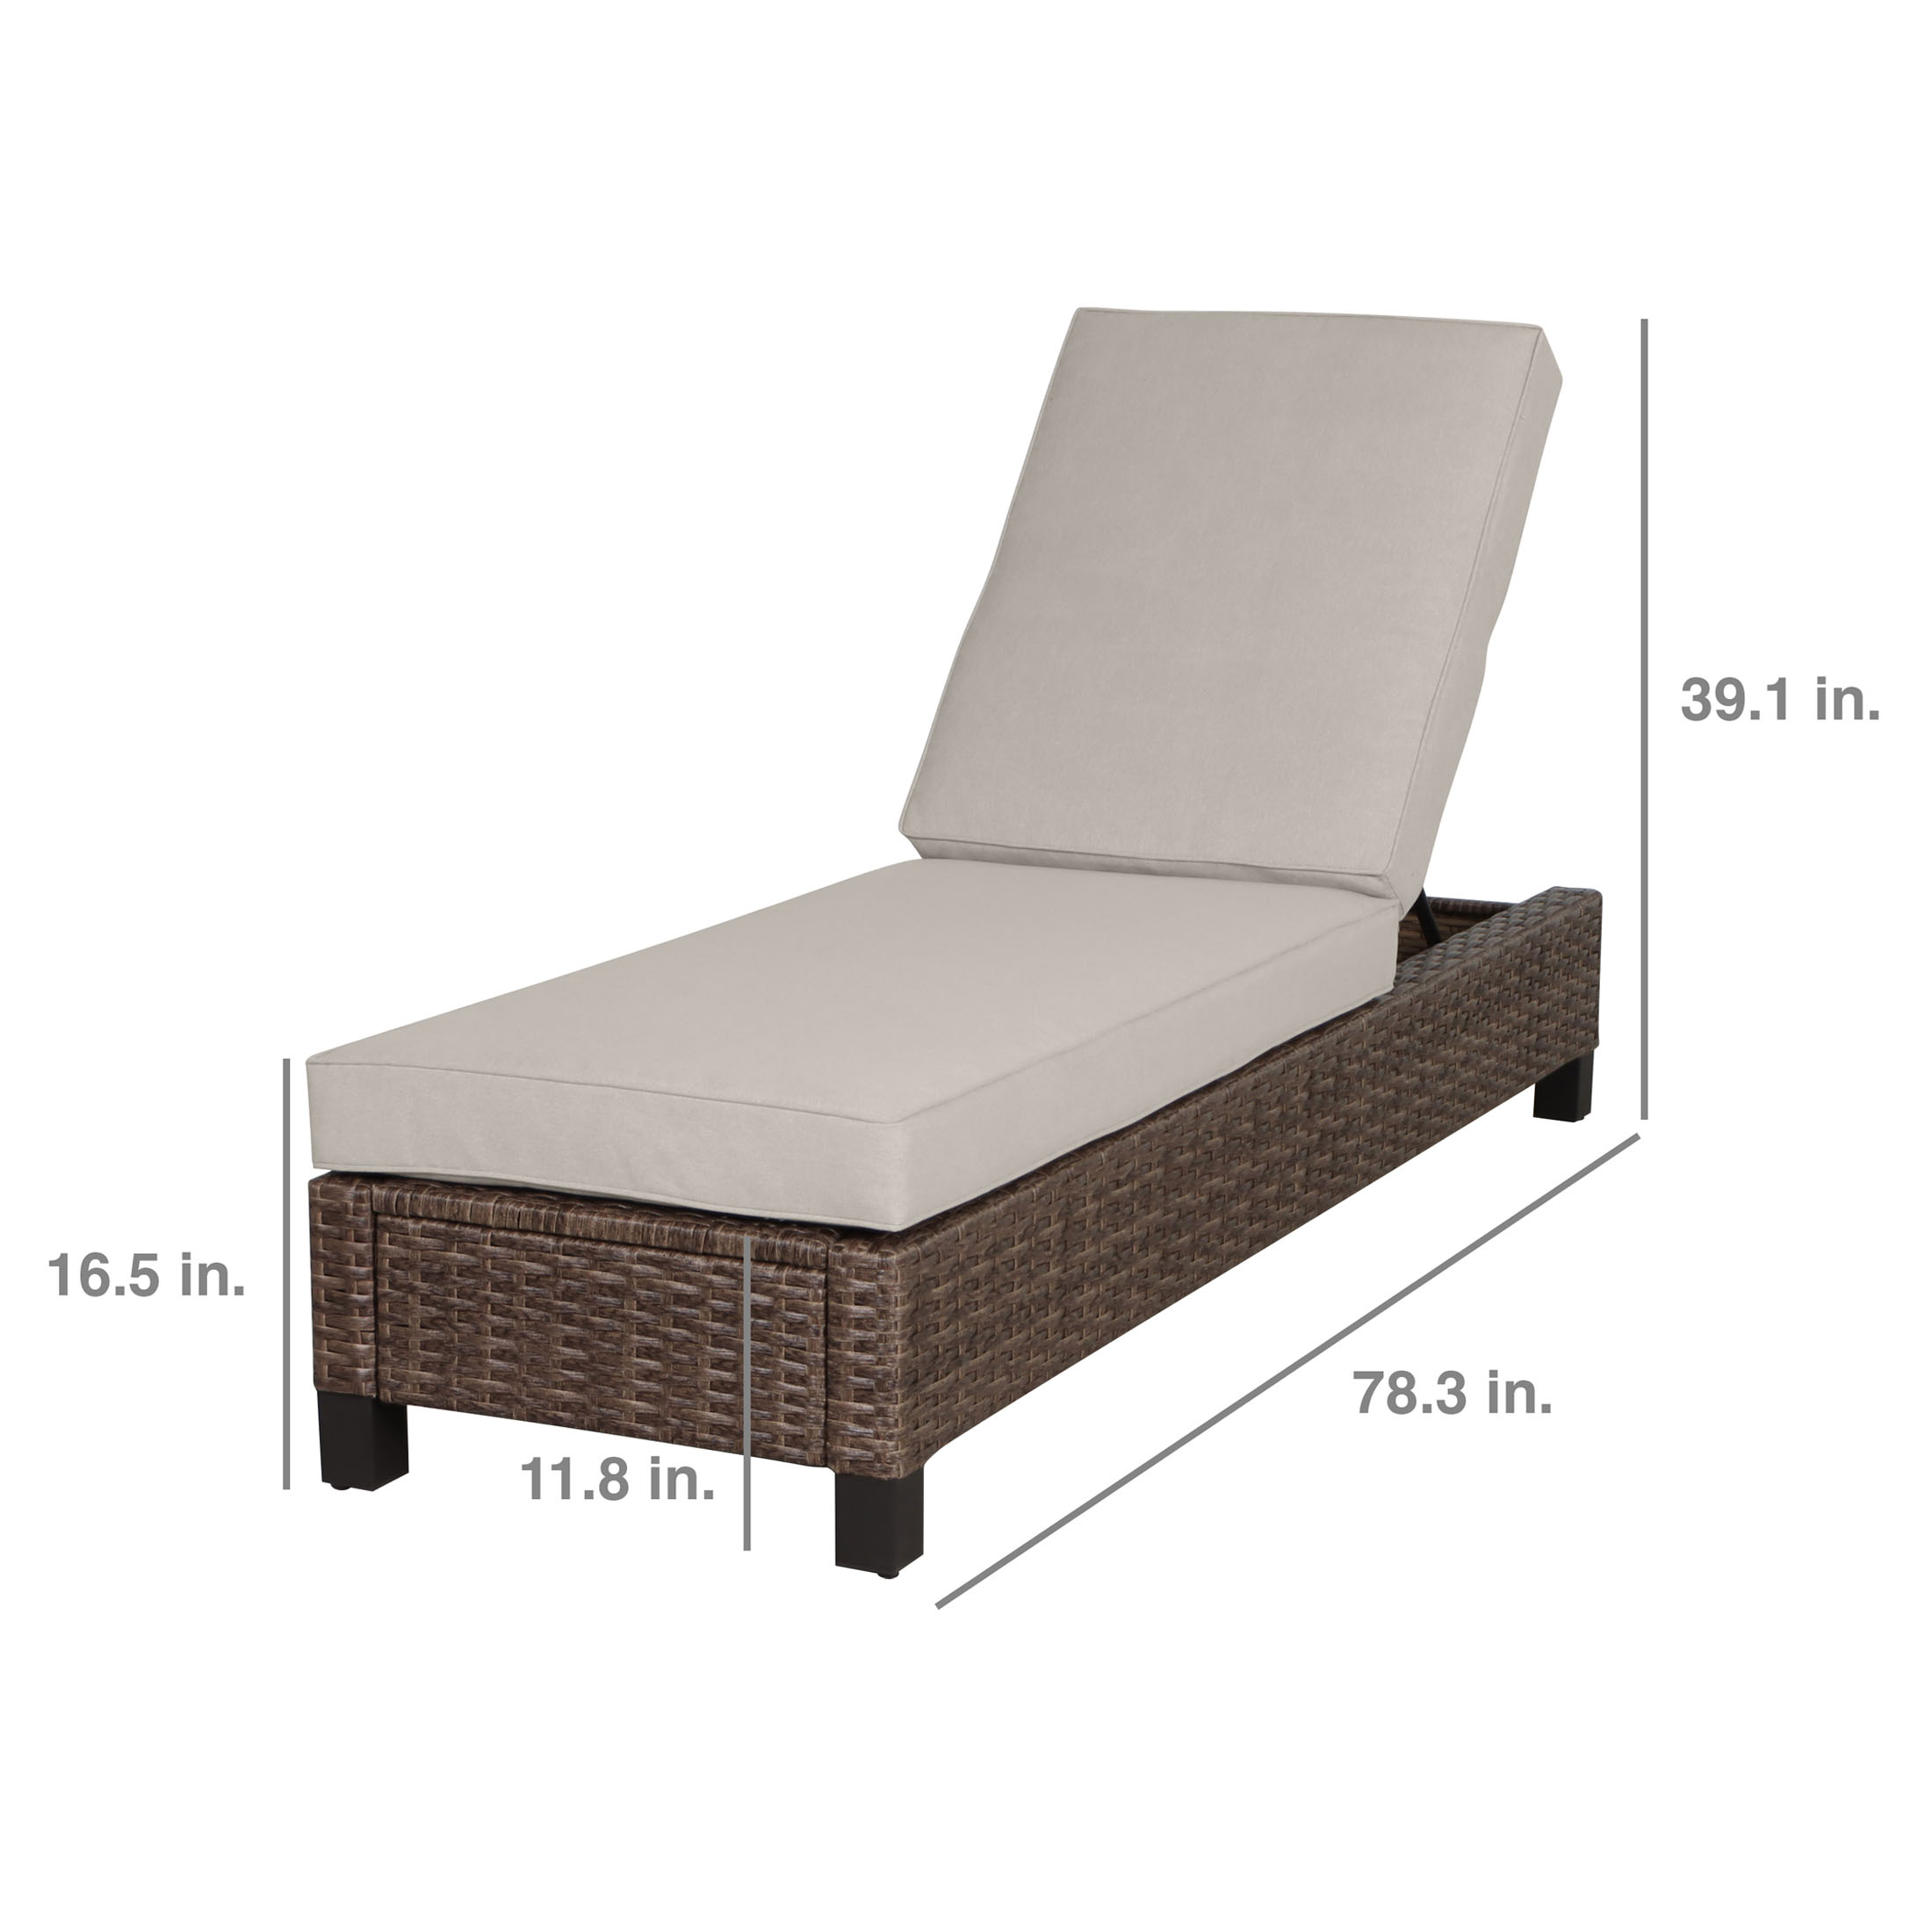 Better Homes & Gardens Brookbury Single Outdoor Chaise Lounge Chair- Beige - image 3 of 5